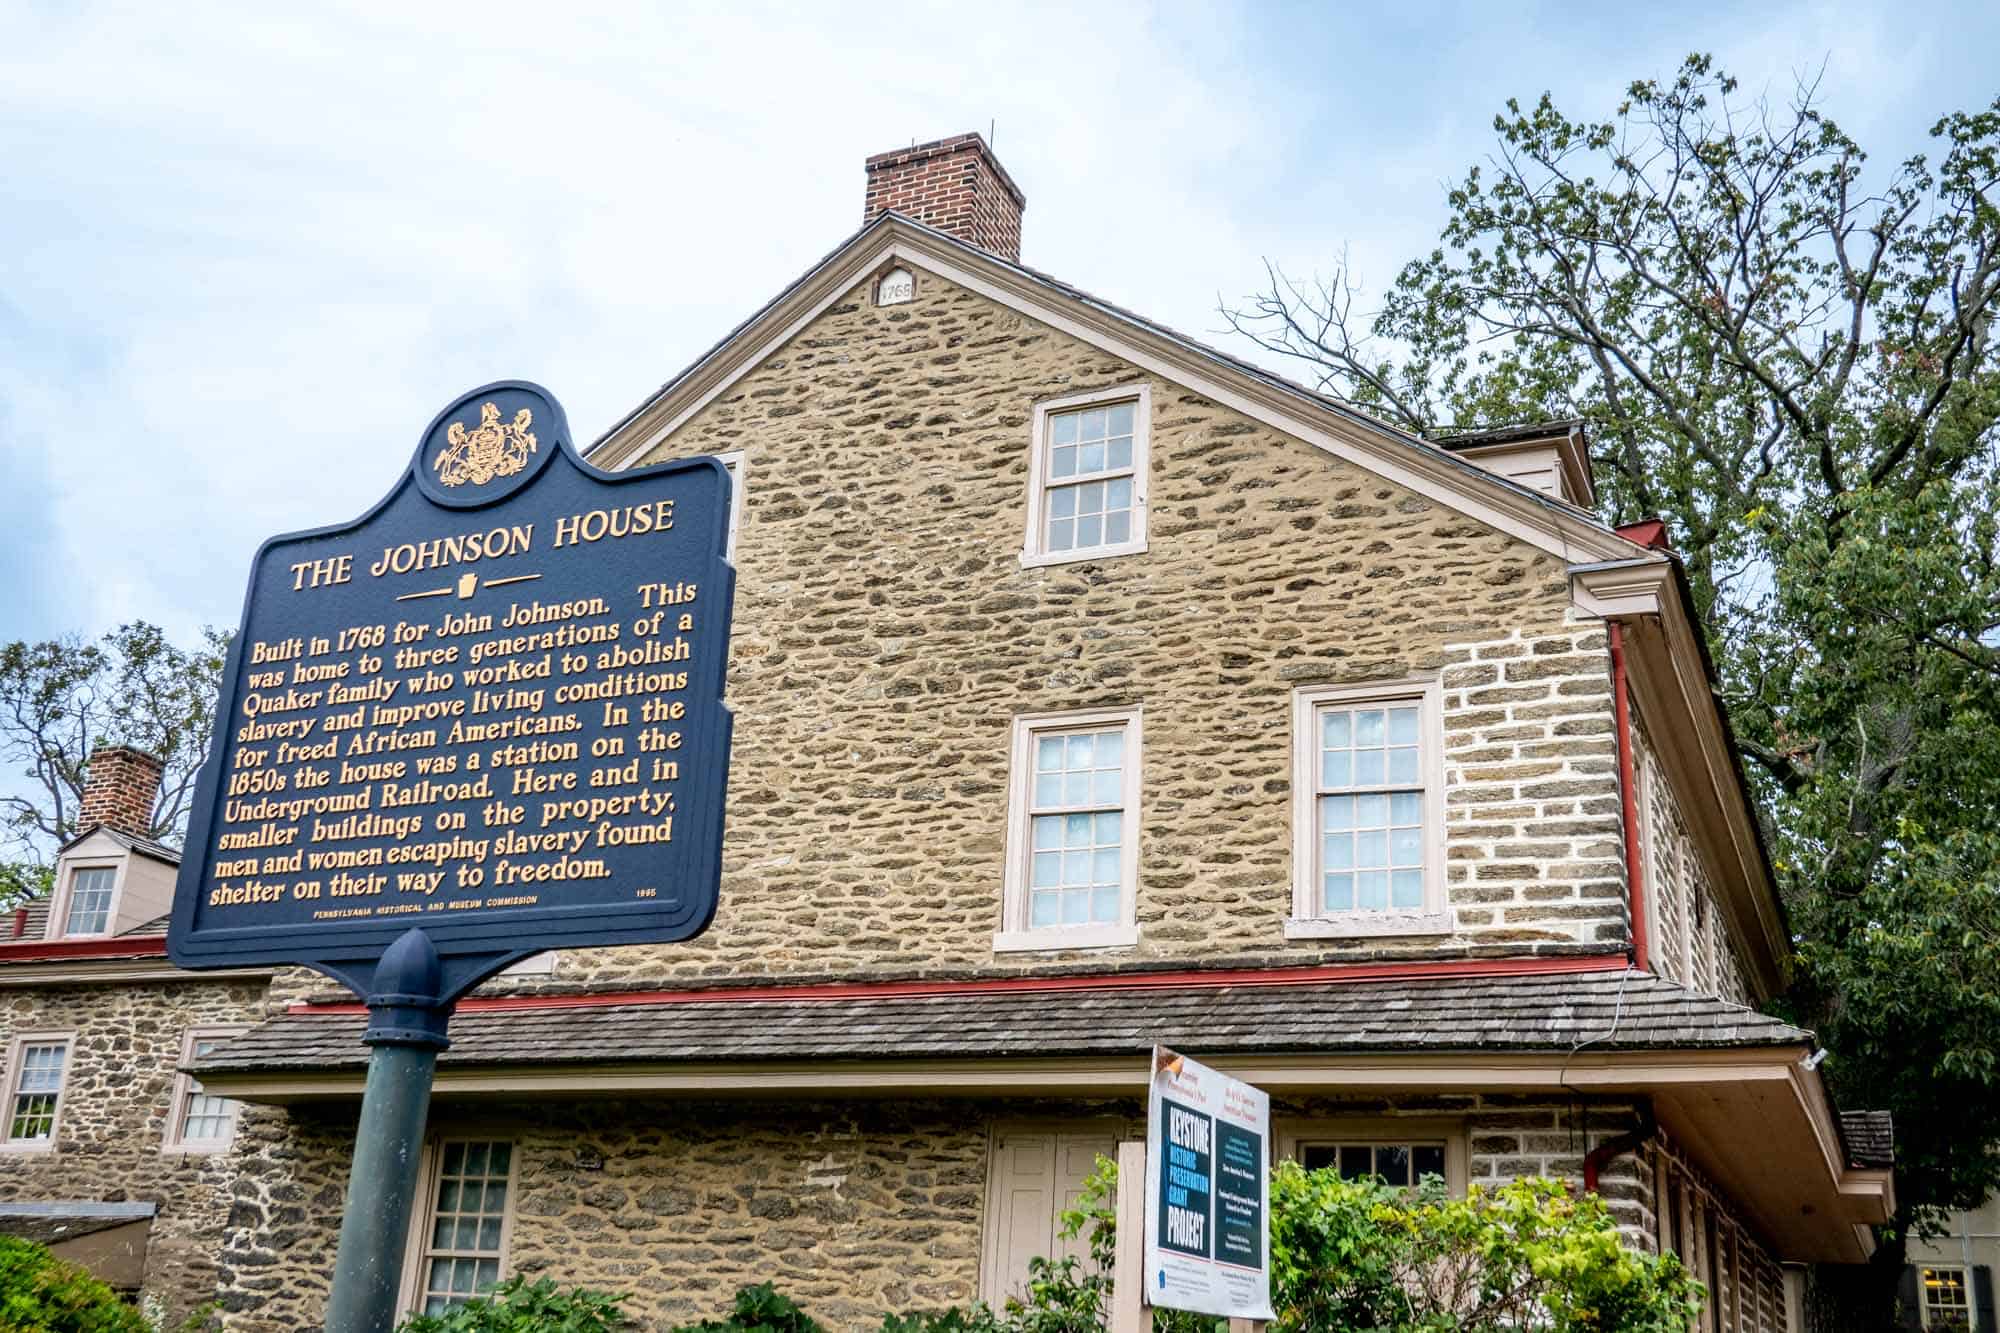 Stone home with a blue historical marker in the foreground for "The Johnson House"